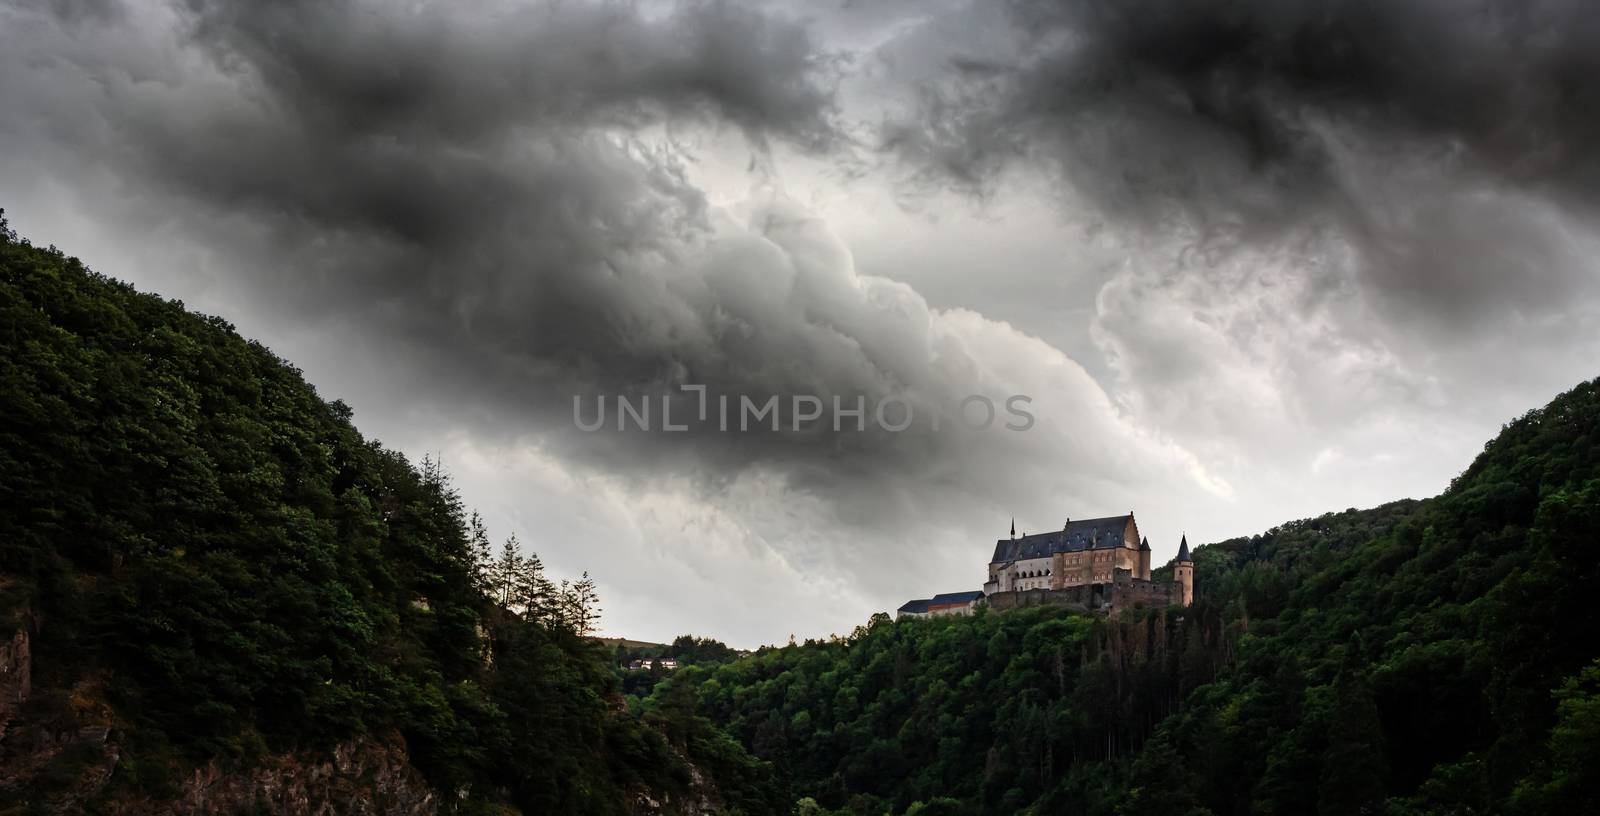 Old castle with a stormy sky, bad weather